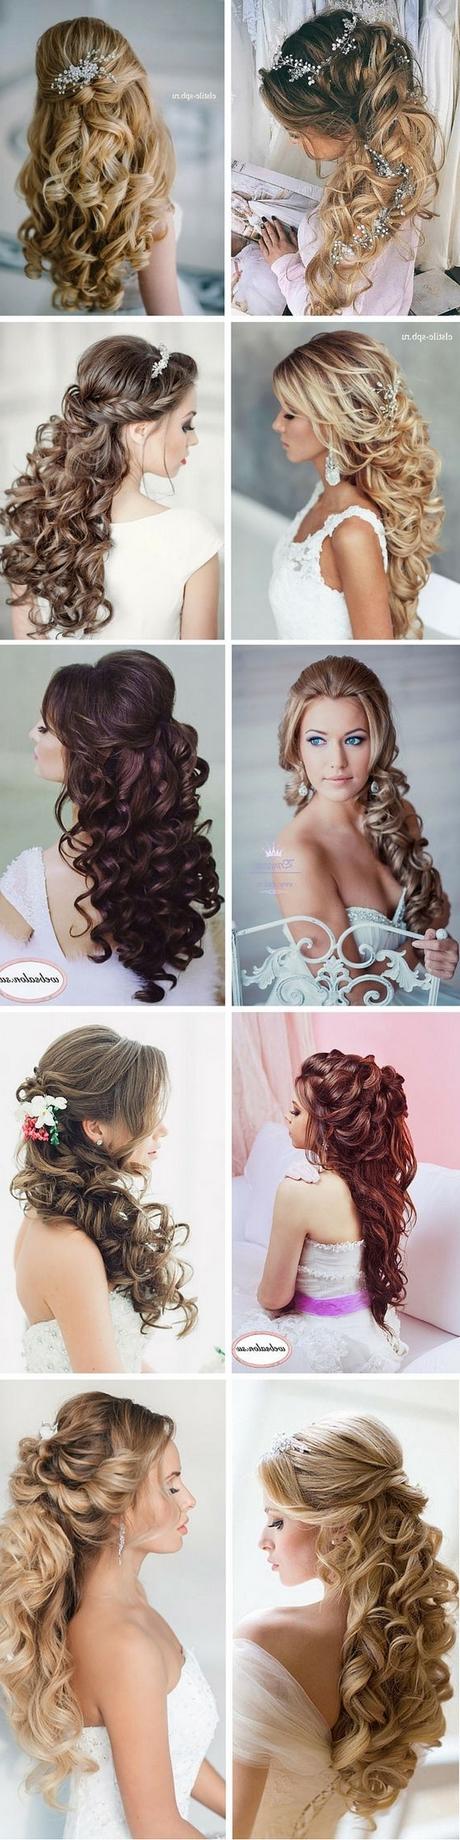 Half up half down hairstyles for long curly hair half-up-half-down-hairstyles-for-long-curly-hair-82_10